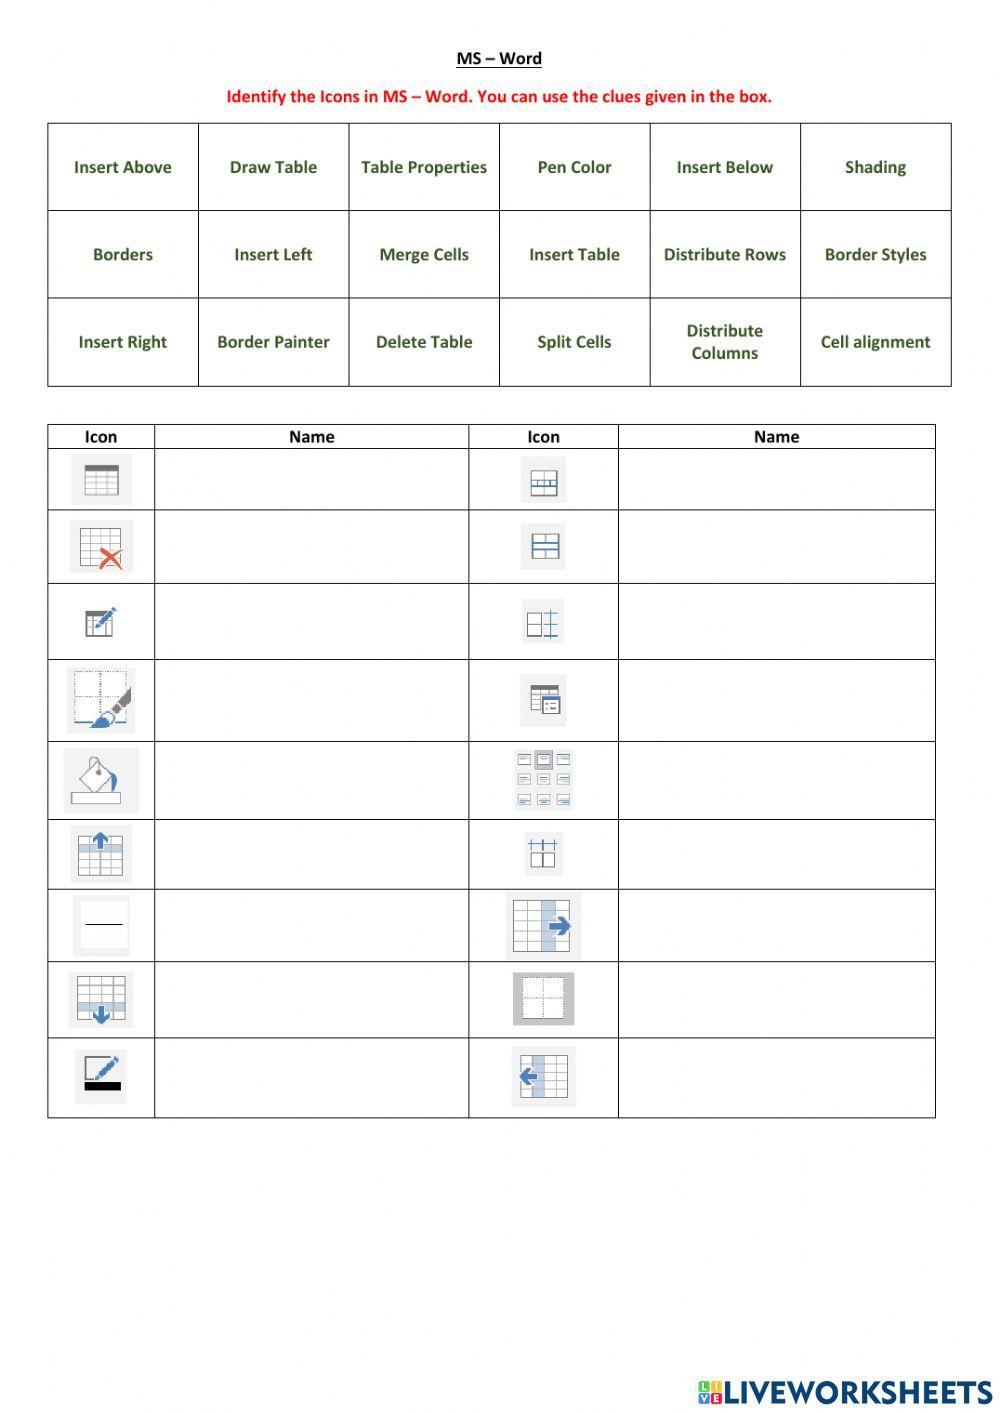 MS-Word - Table - Icons